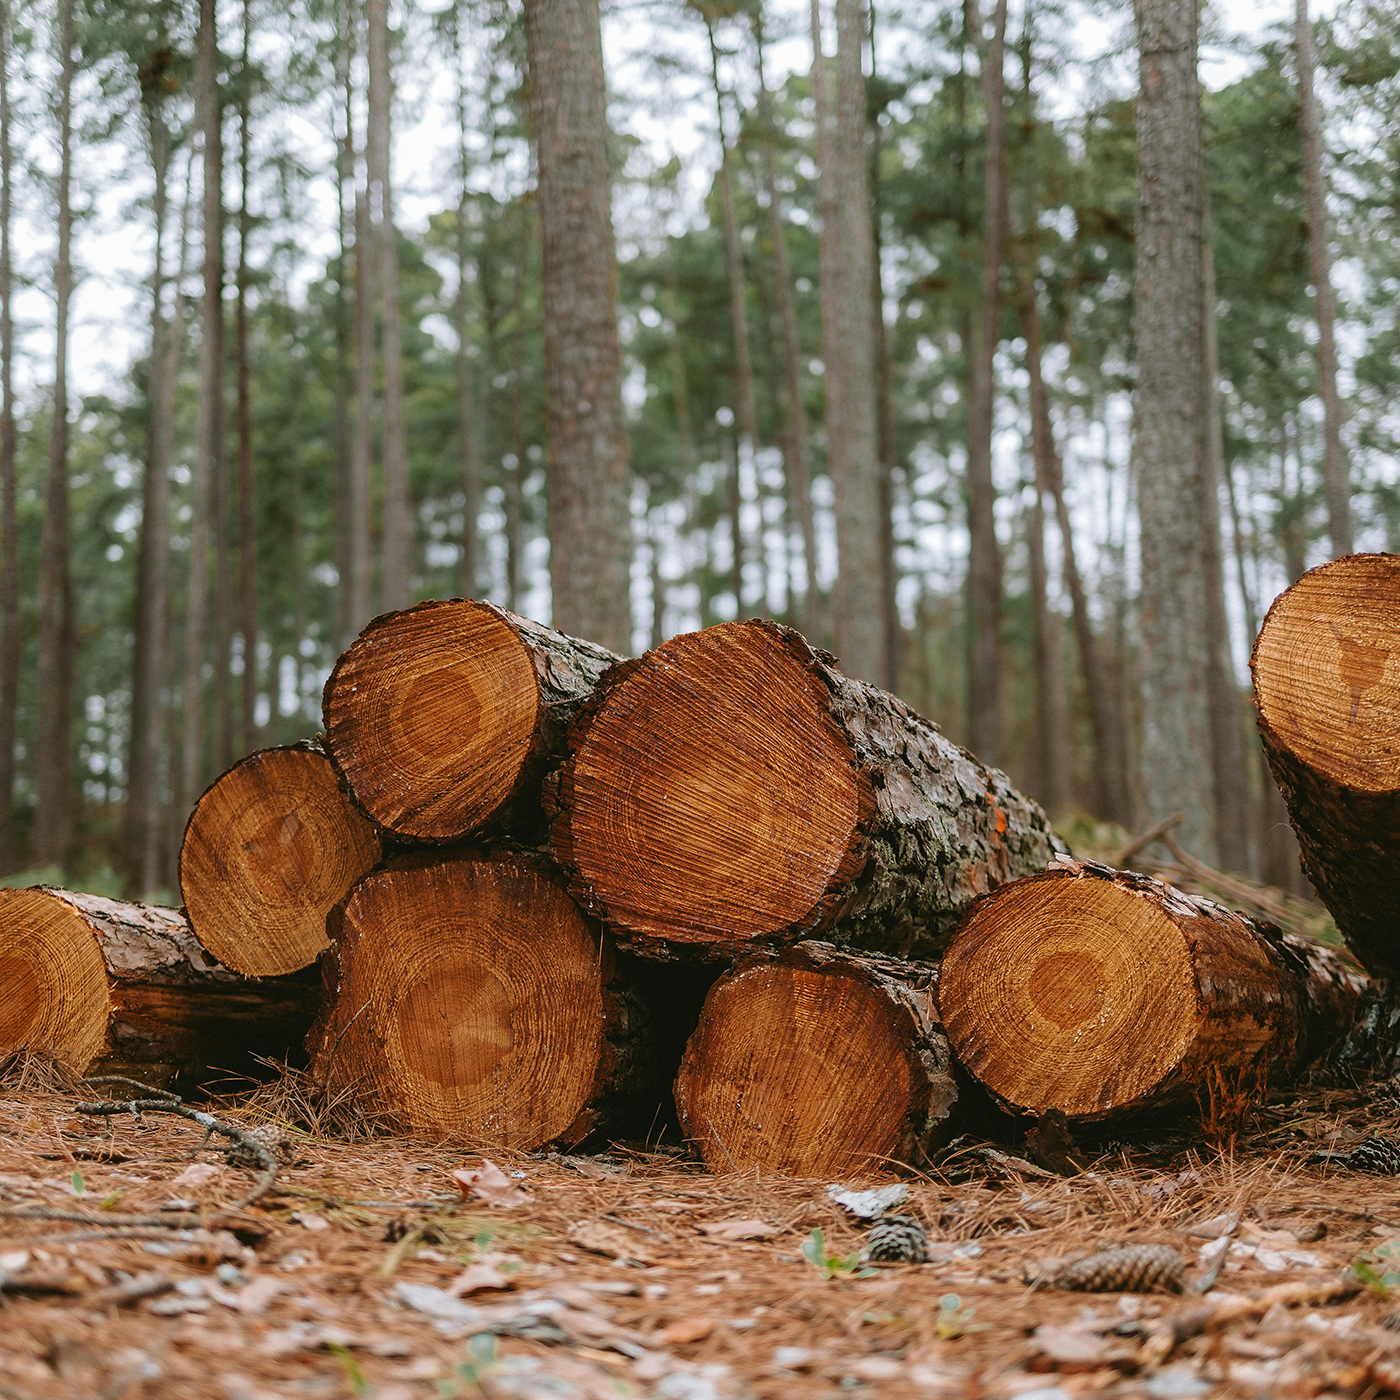 Timber chopped logs on the ground in a forest.